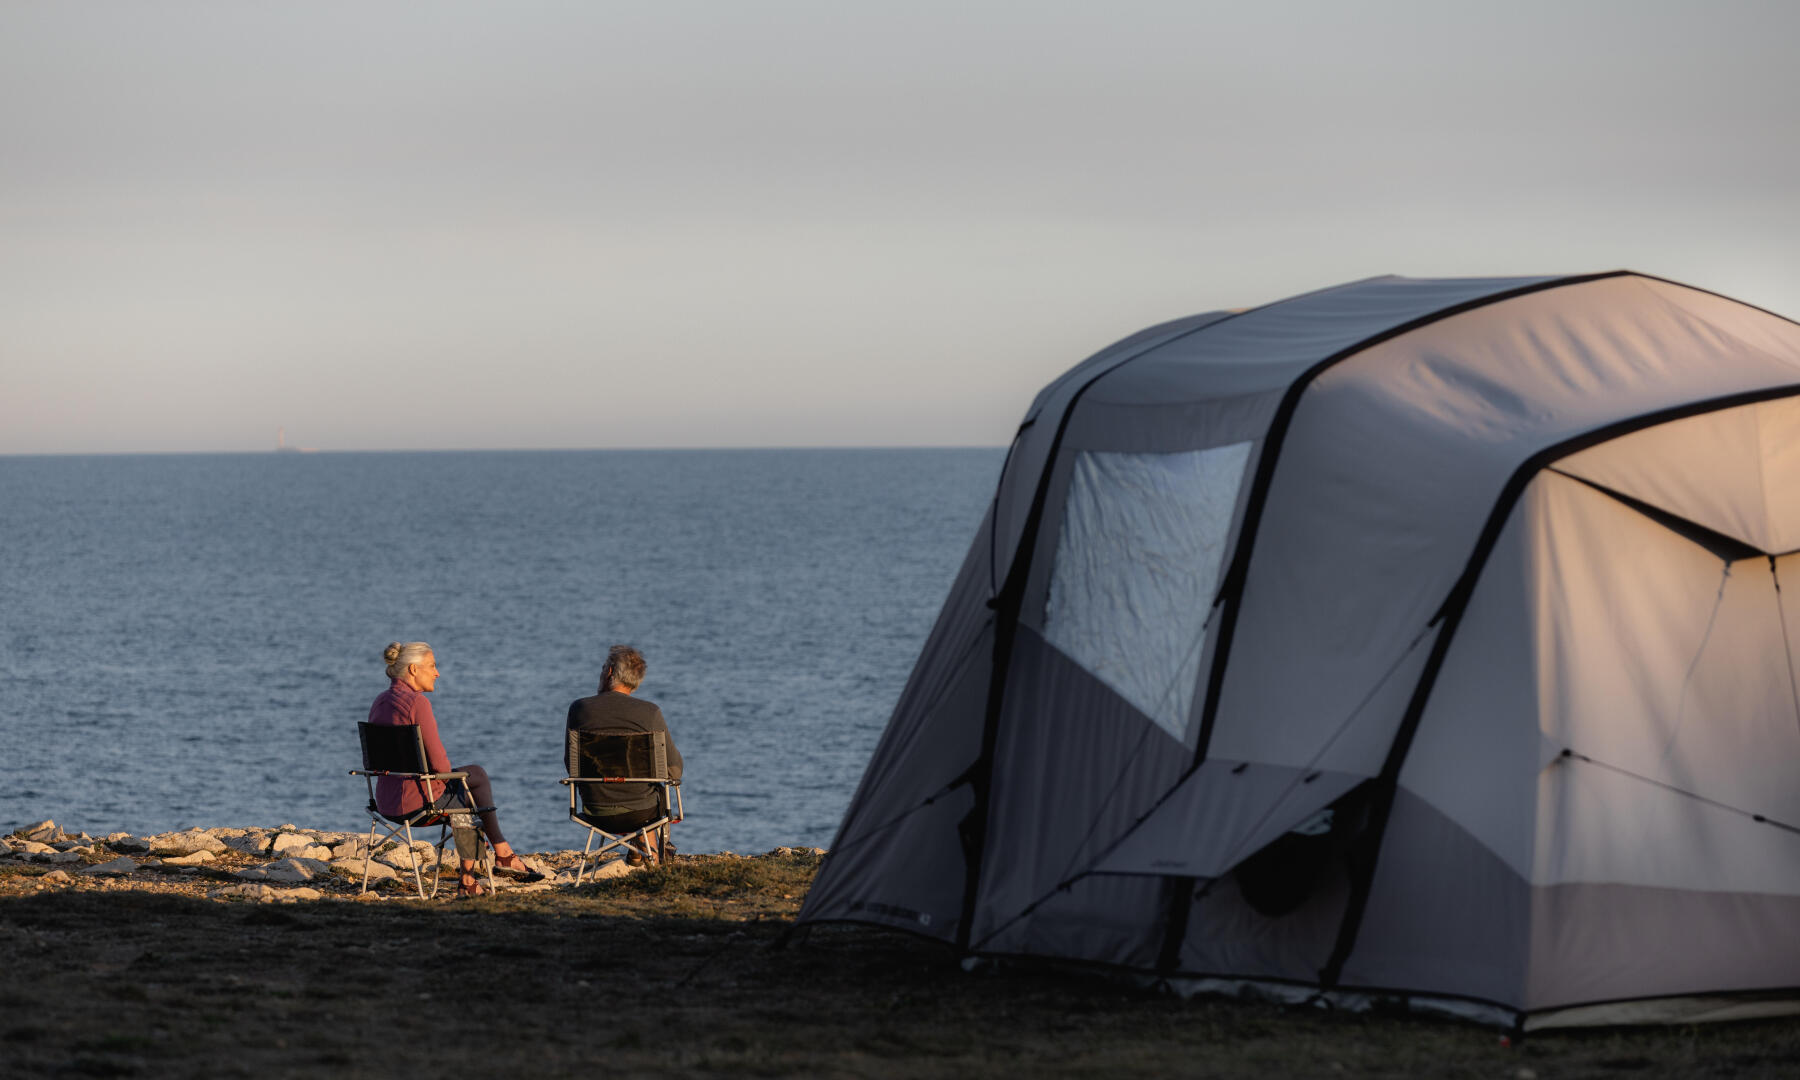 QUECHUA TENTS: It’s never been so easy to sleep outdoors!